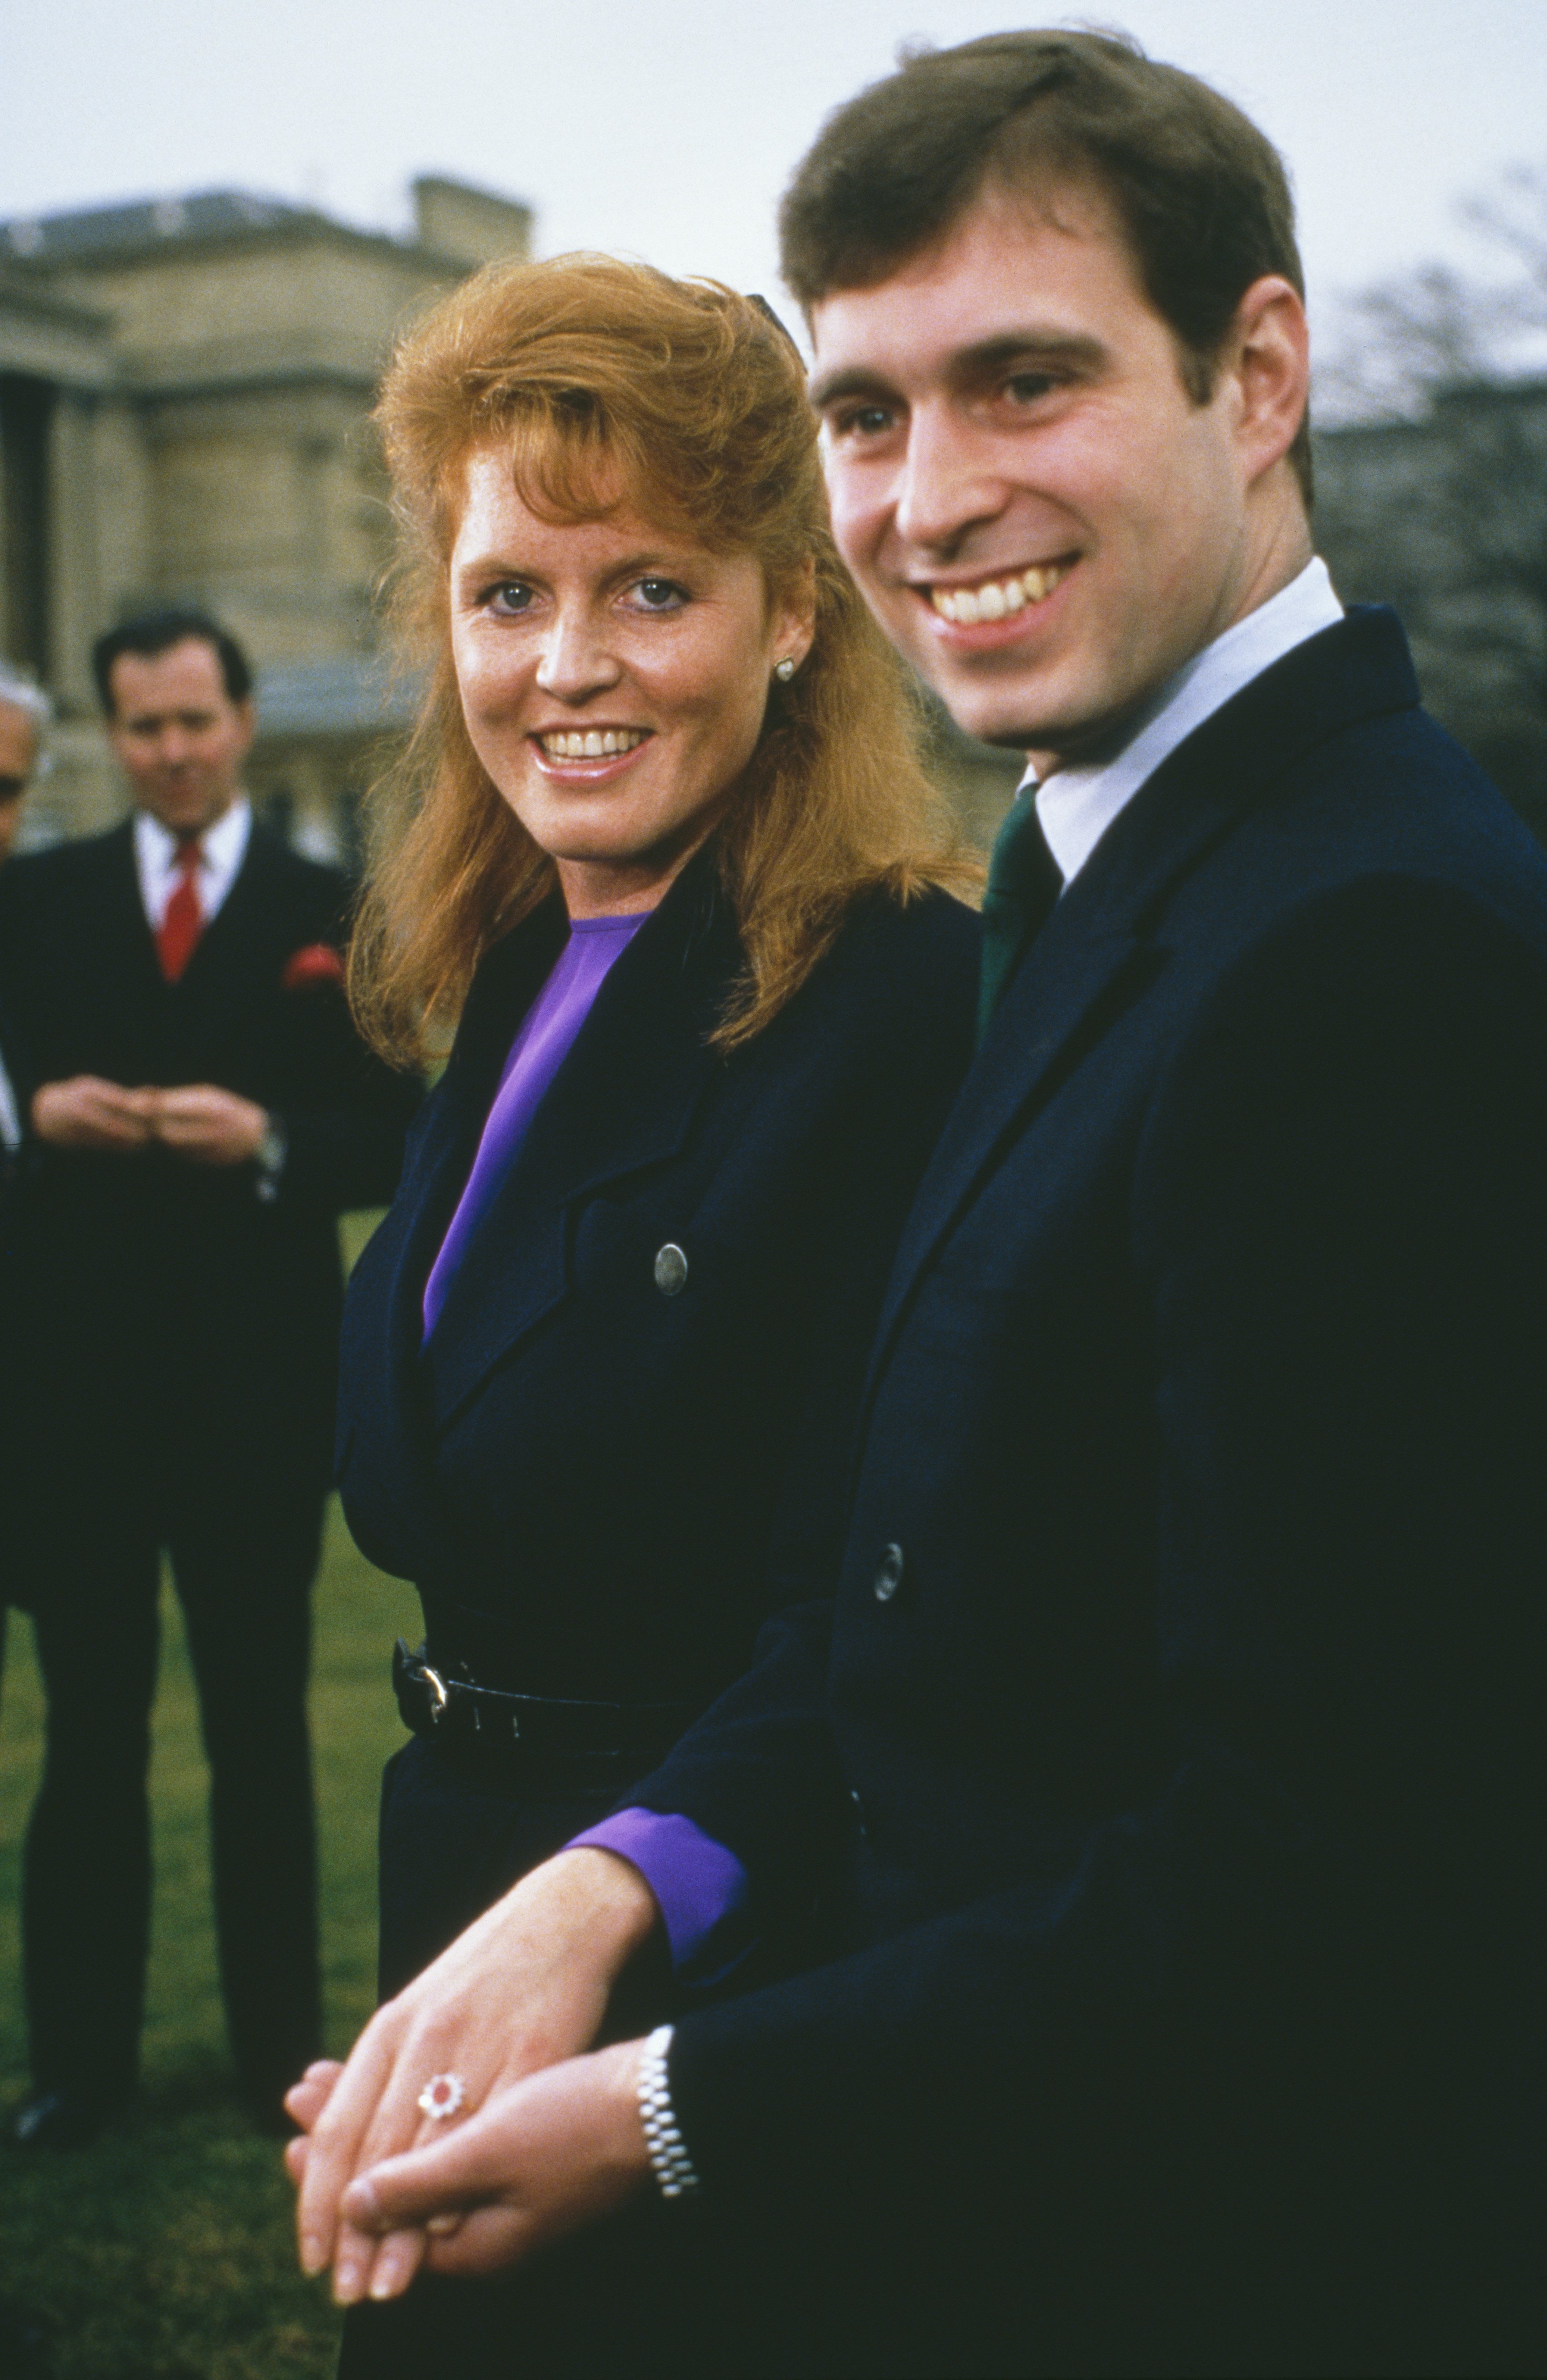 Prince Andrew with Sarah Ferguson at Buckingham Palace after the announcement of their engagement in London on March 17, 1986 | Source: Getty Images